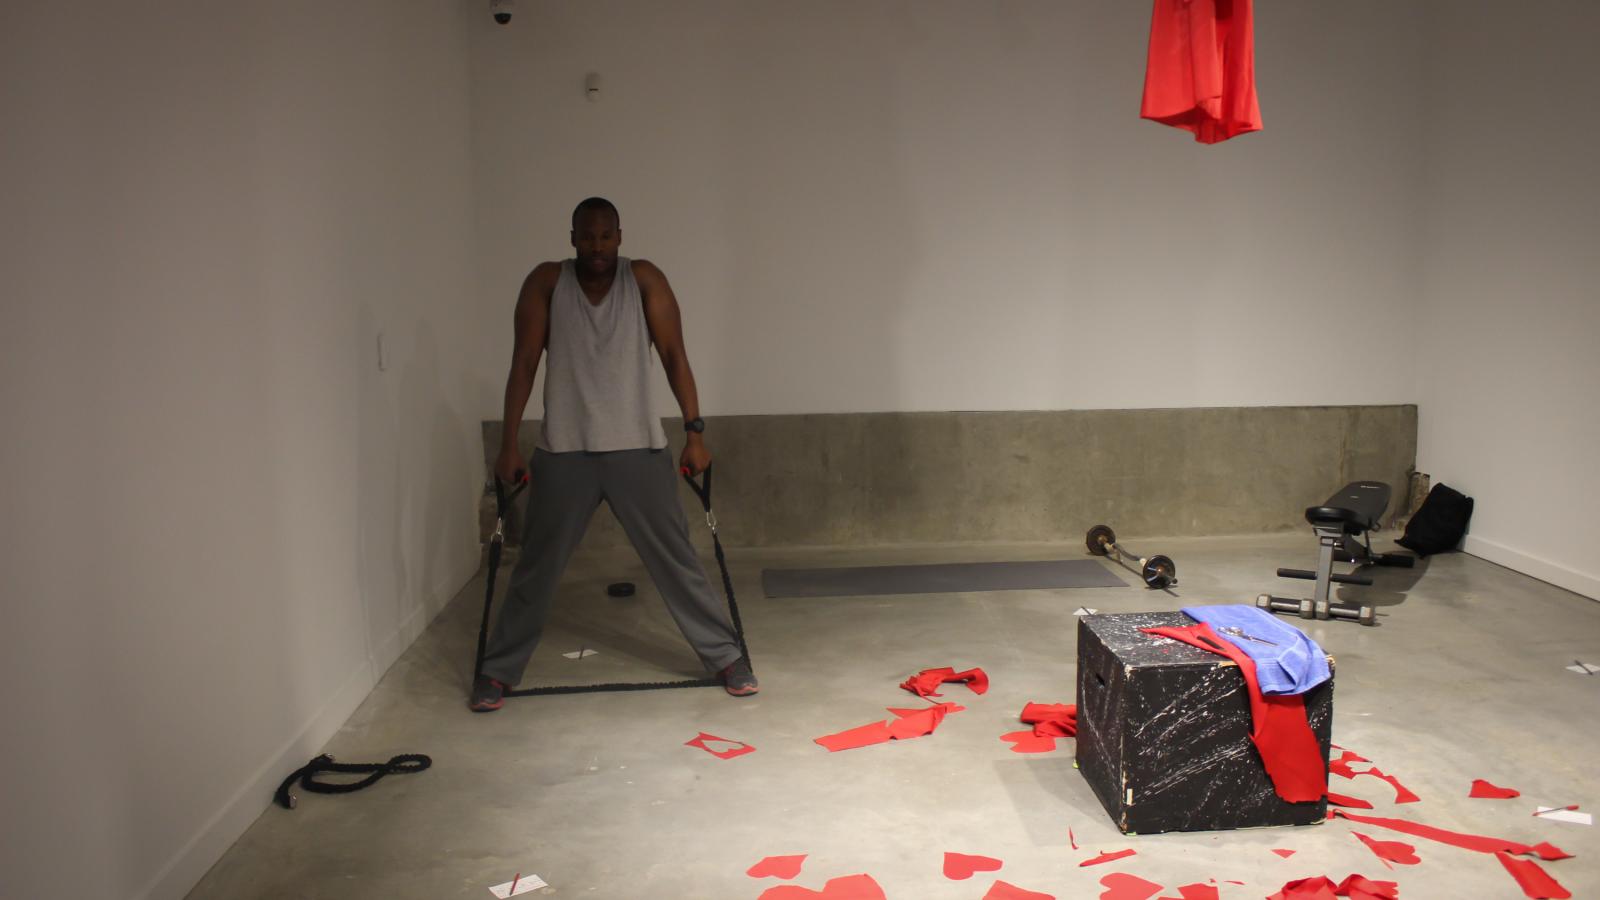 Sifiso Mazibuko in his performance art piece for You Make Me Do This at Ohio State’s Urban Arts Space. 